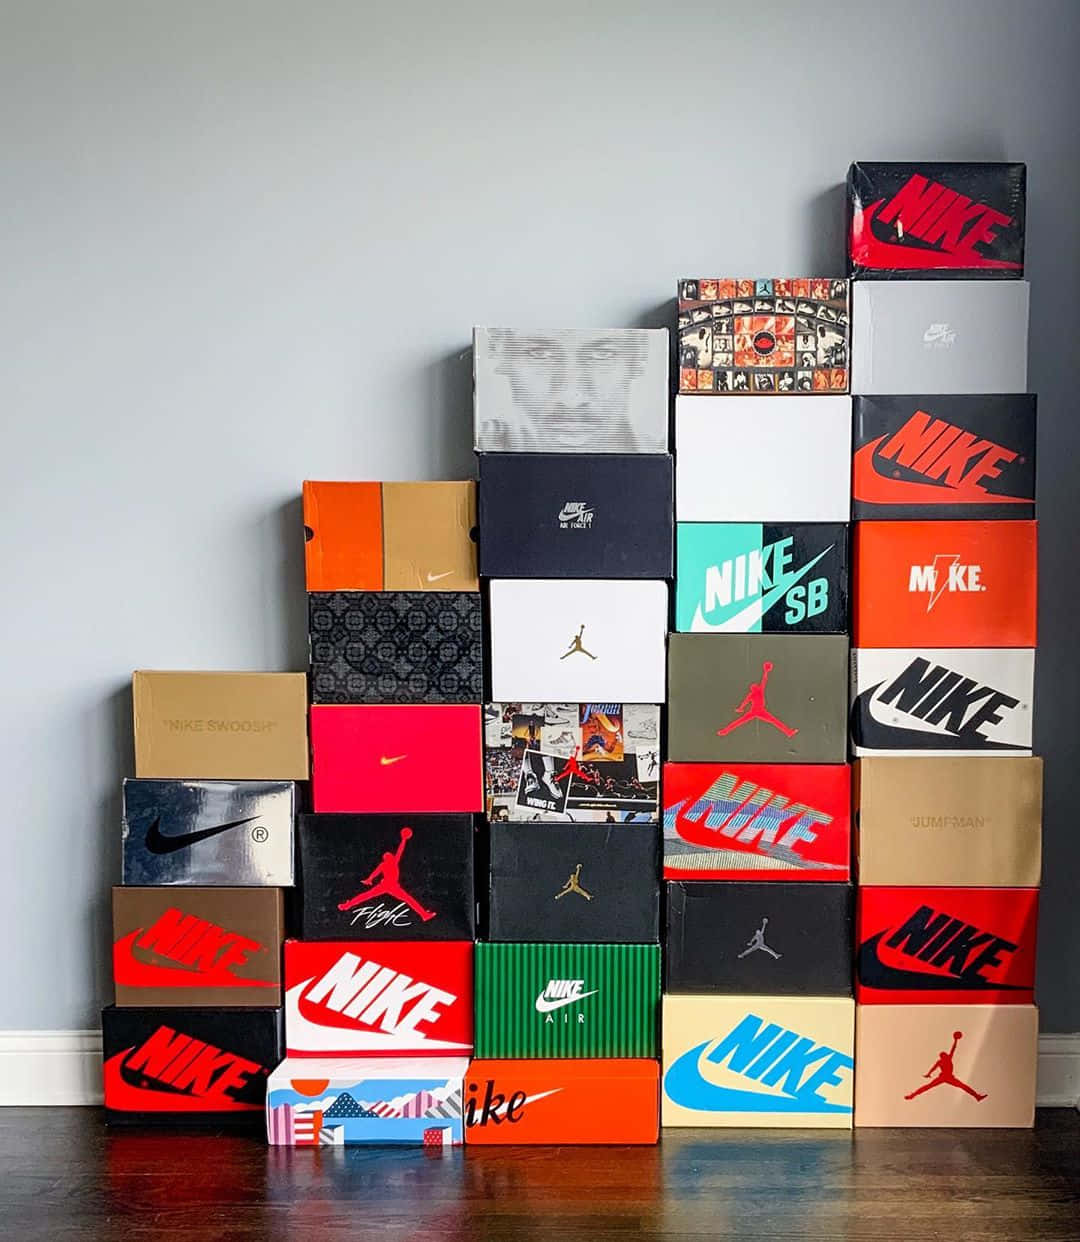 There's nothing quite like opening a new shoe box! Wallpaper